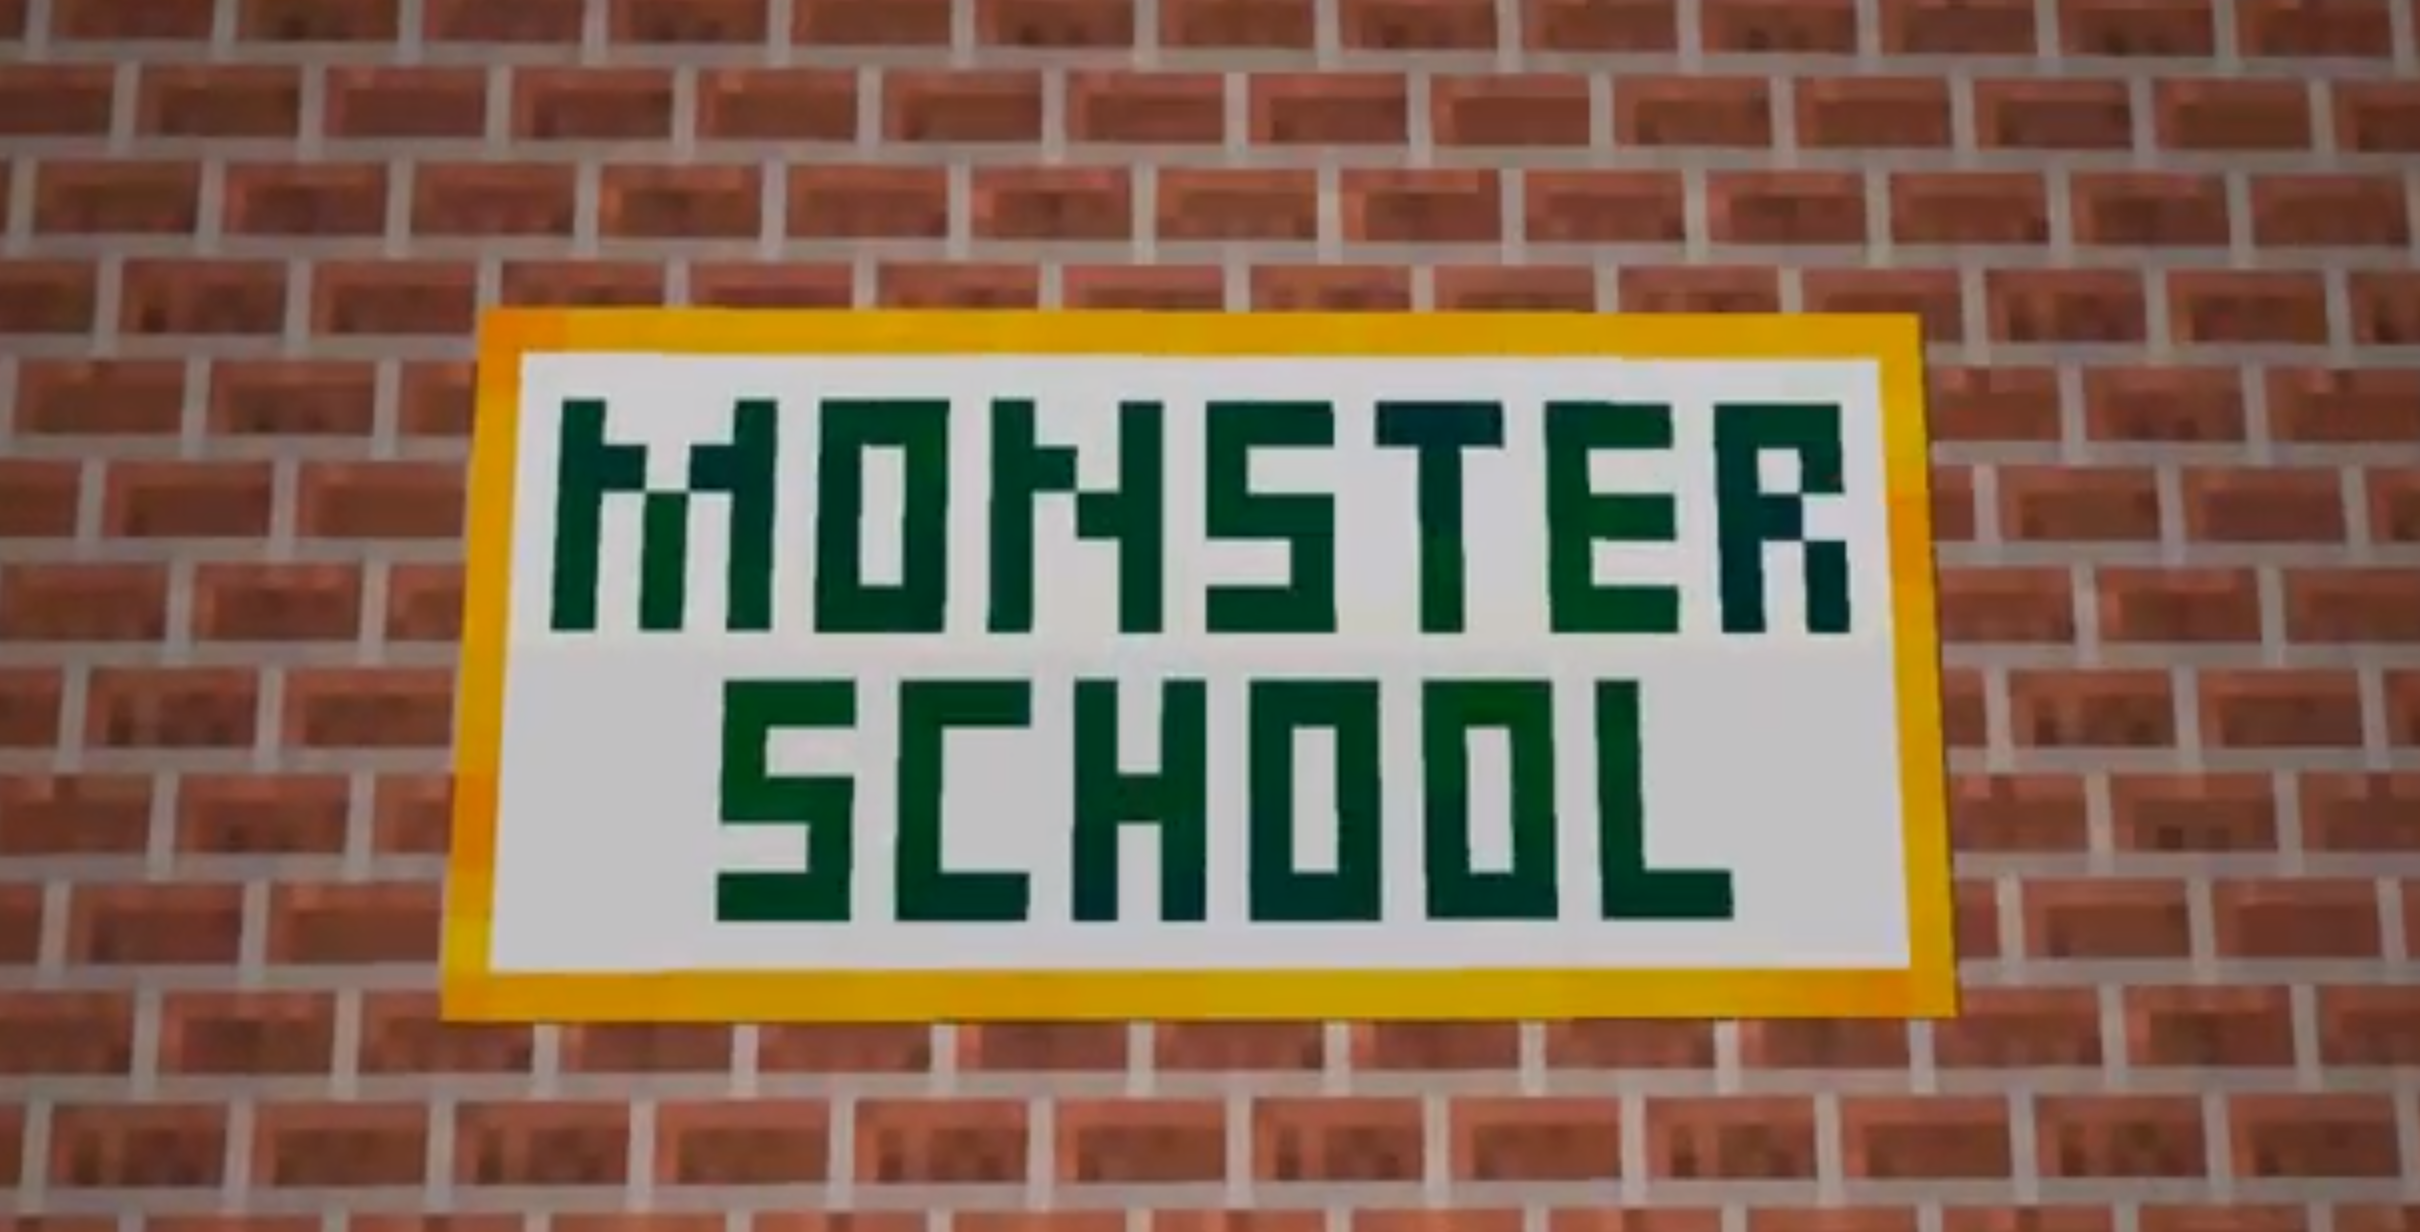 Monster School : Baby Zombie , Where Are You Going ? - Minecraft